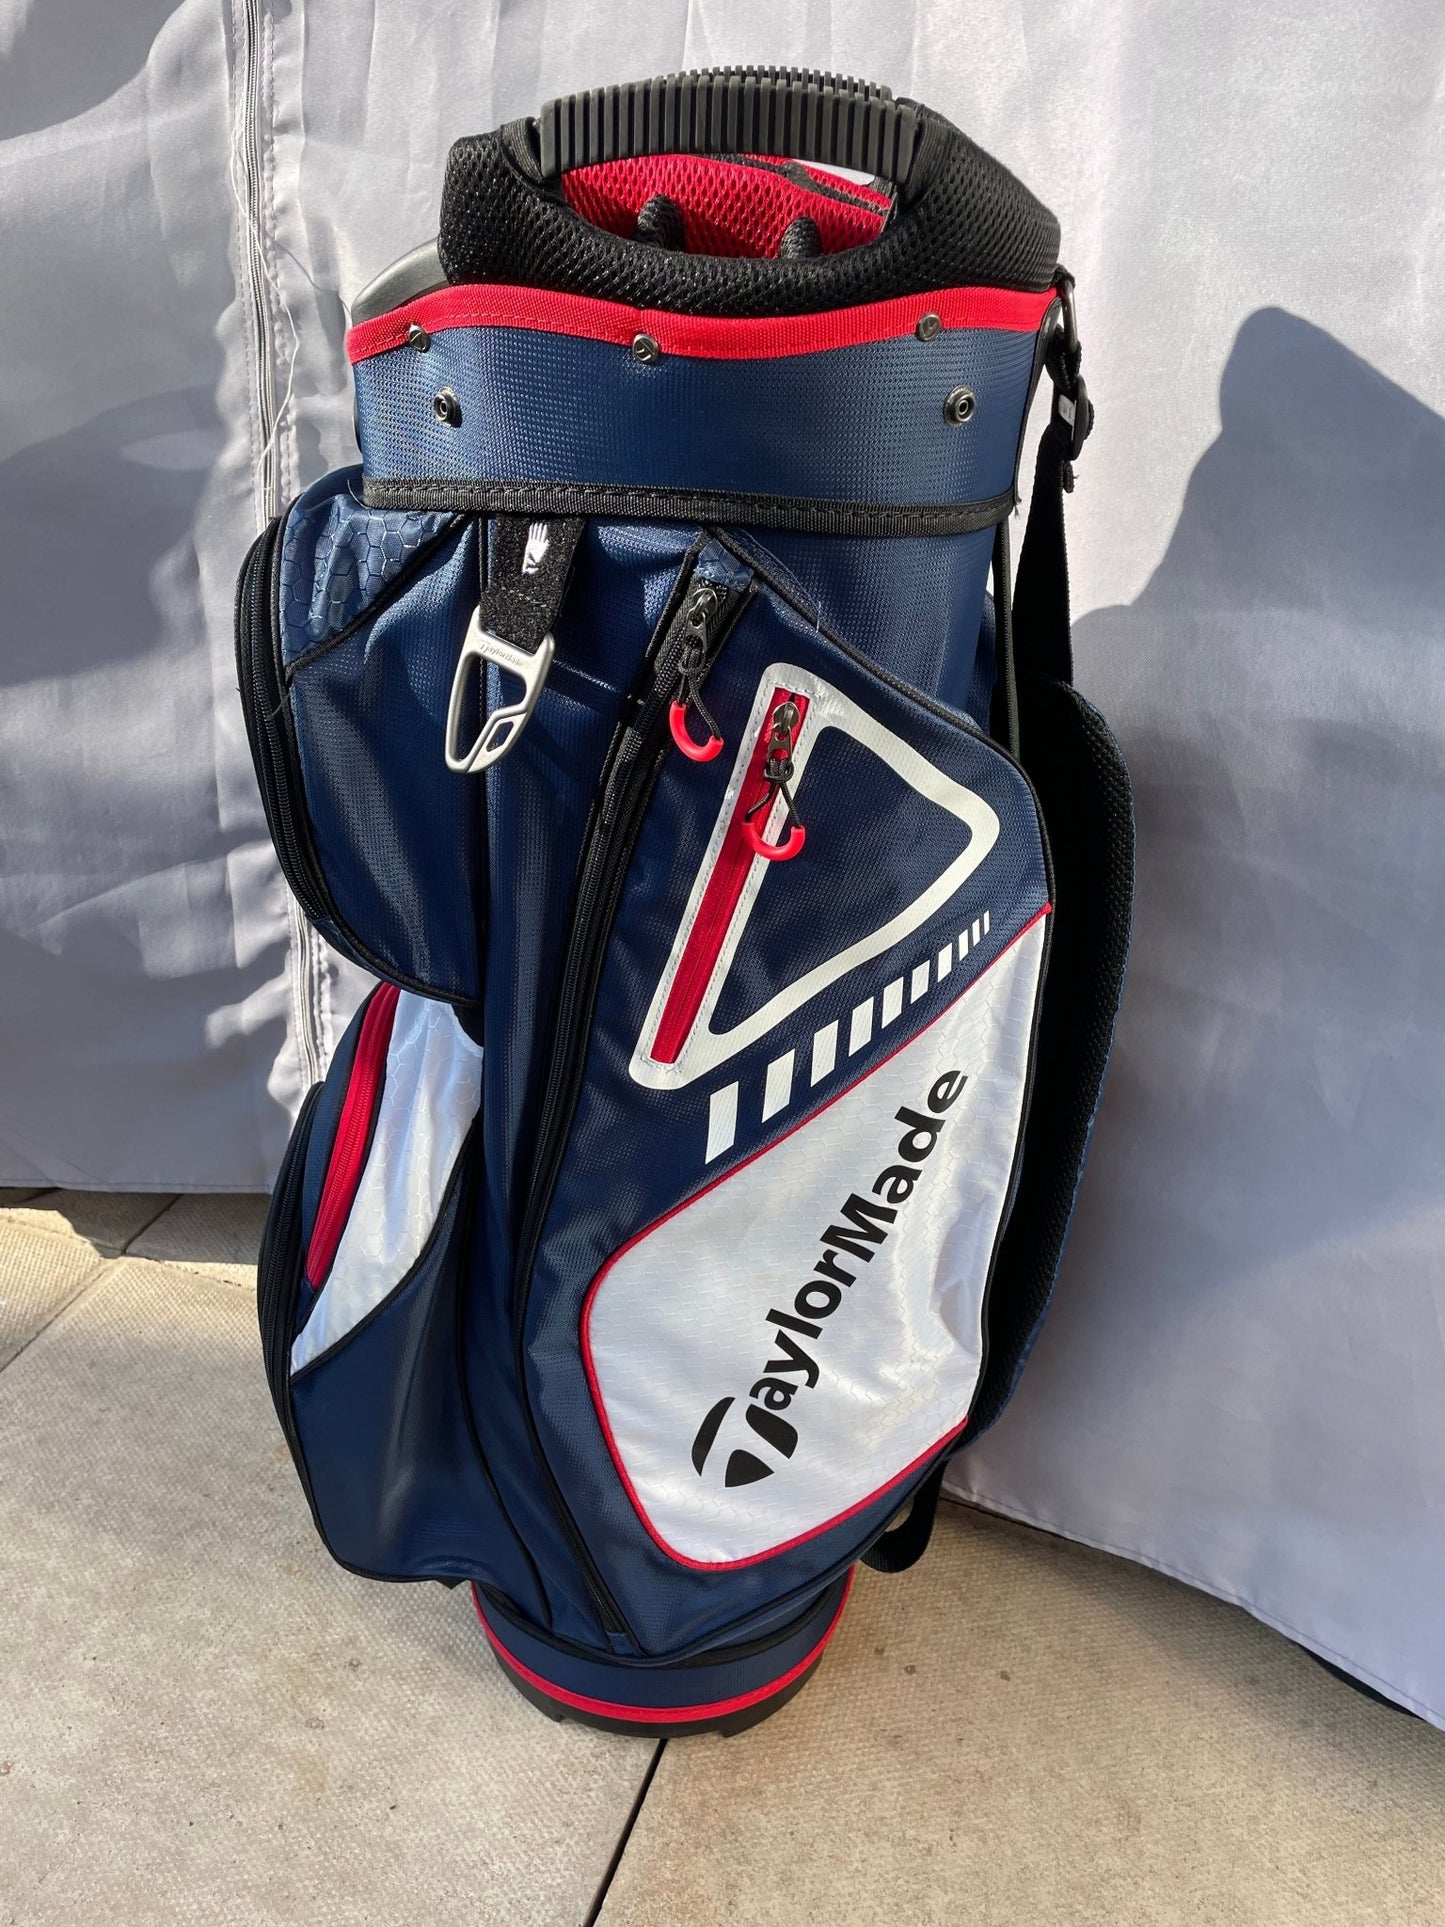 Taylormade Cart/Trolley Bag With Rain Hood - Please Read Description Before Purchasing! - Golf Store UK